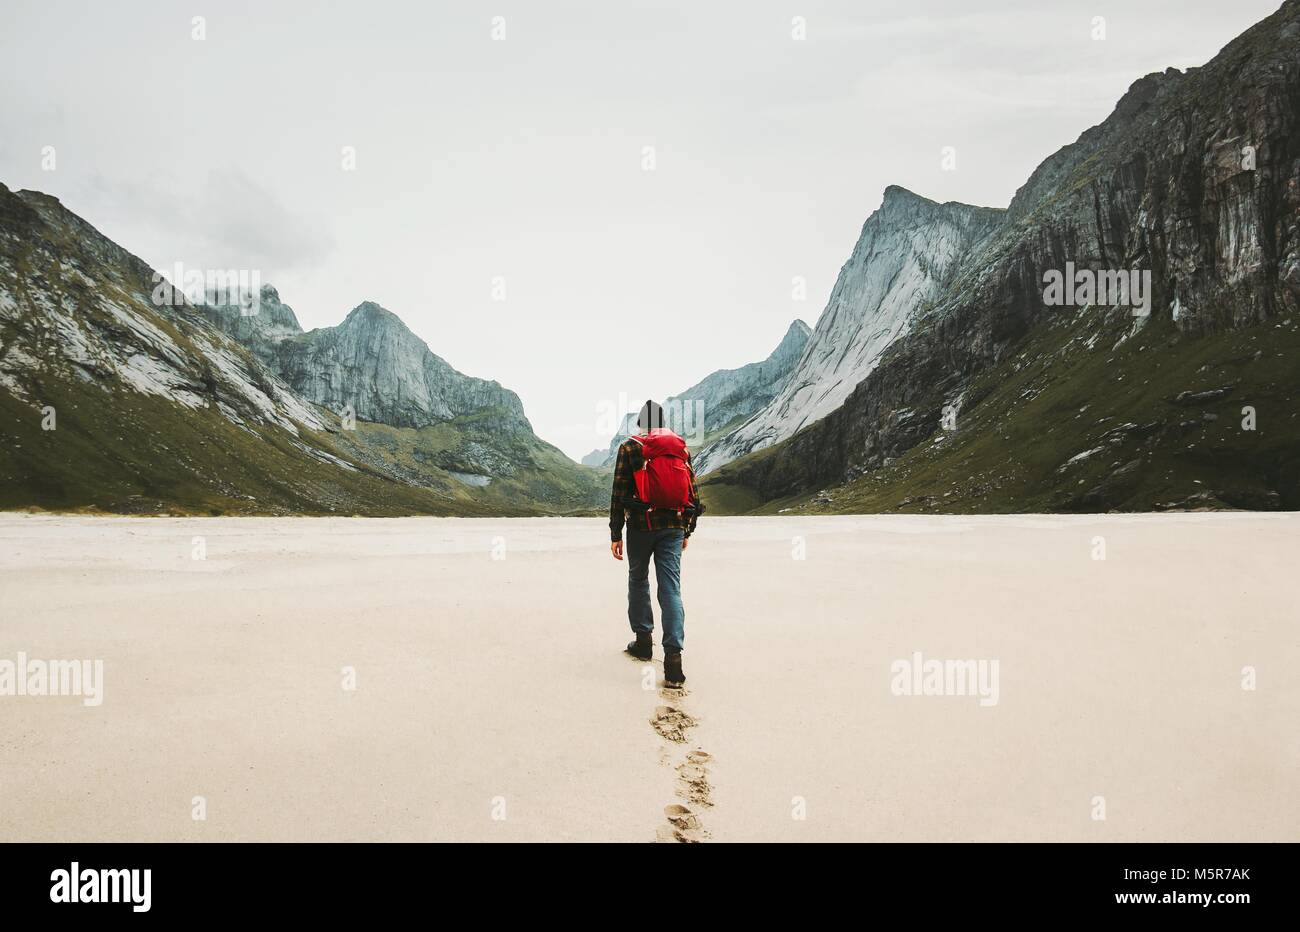 Man with red backpack walking alone at Horseid beach in Norway Travel lifestyle concept adventure outdoor summer vacations wild nature Stock Photo